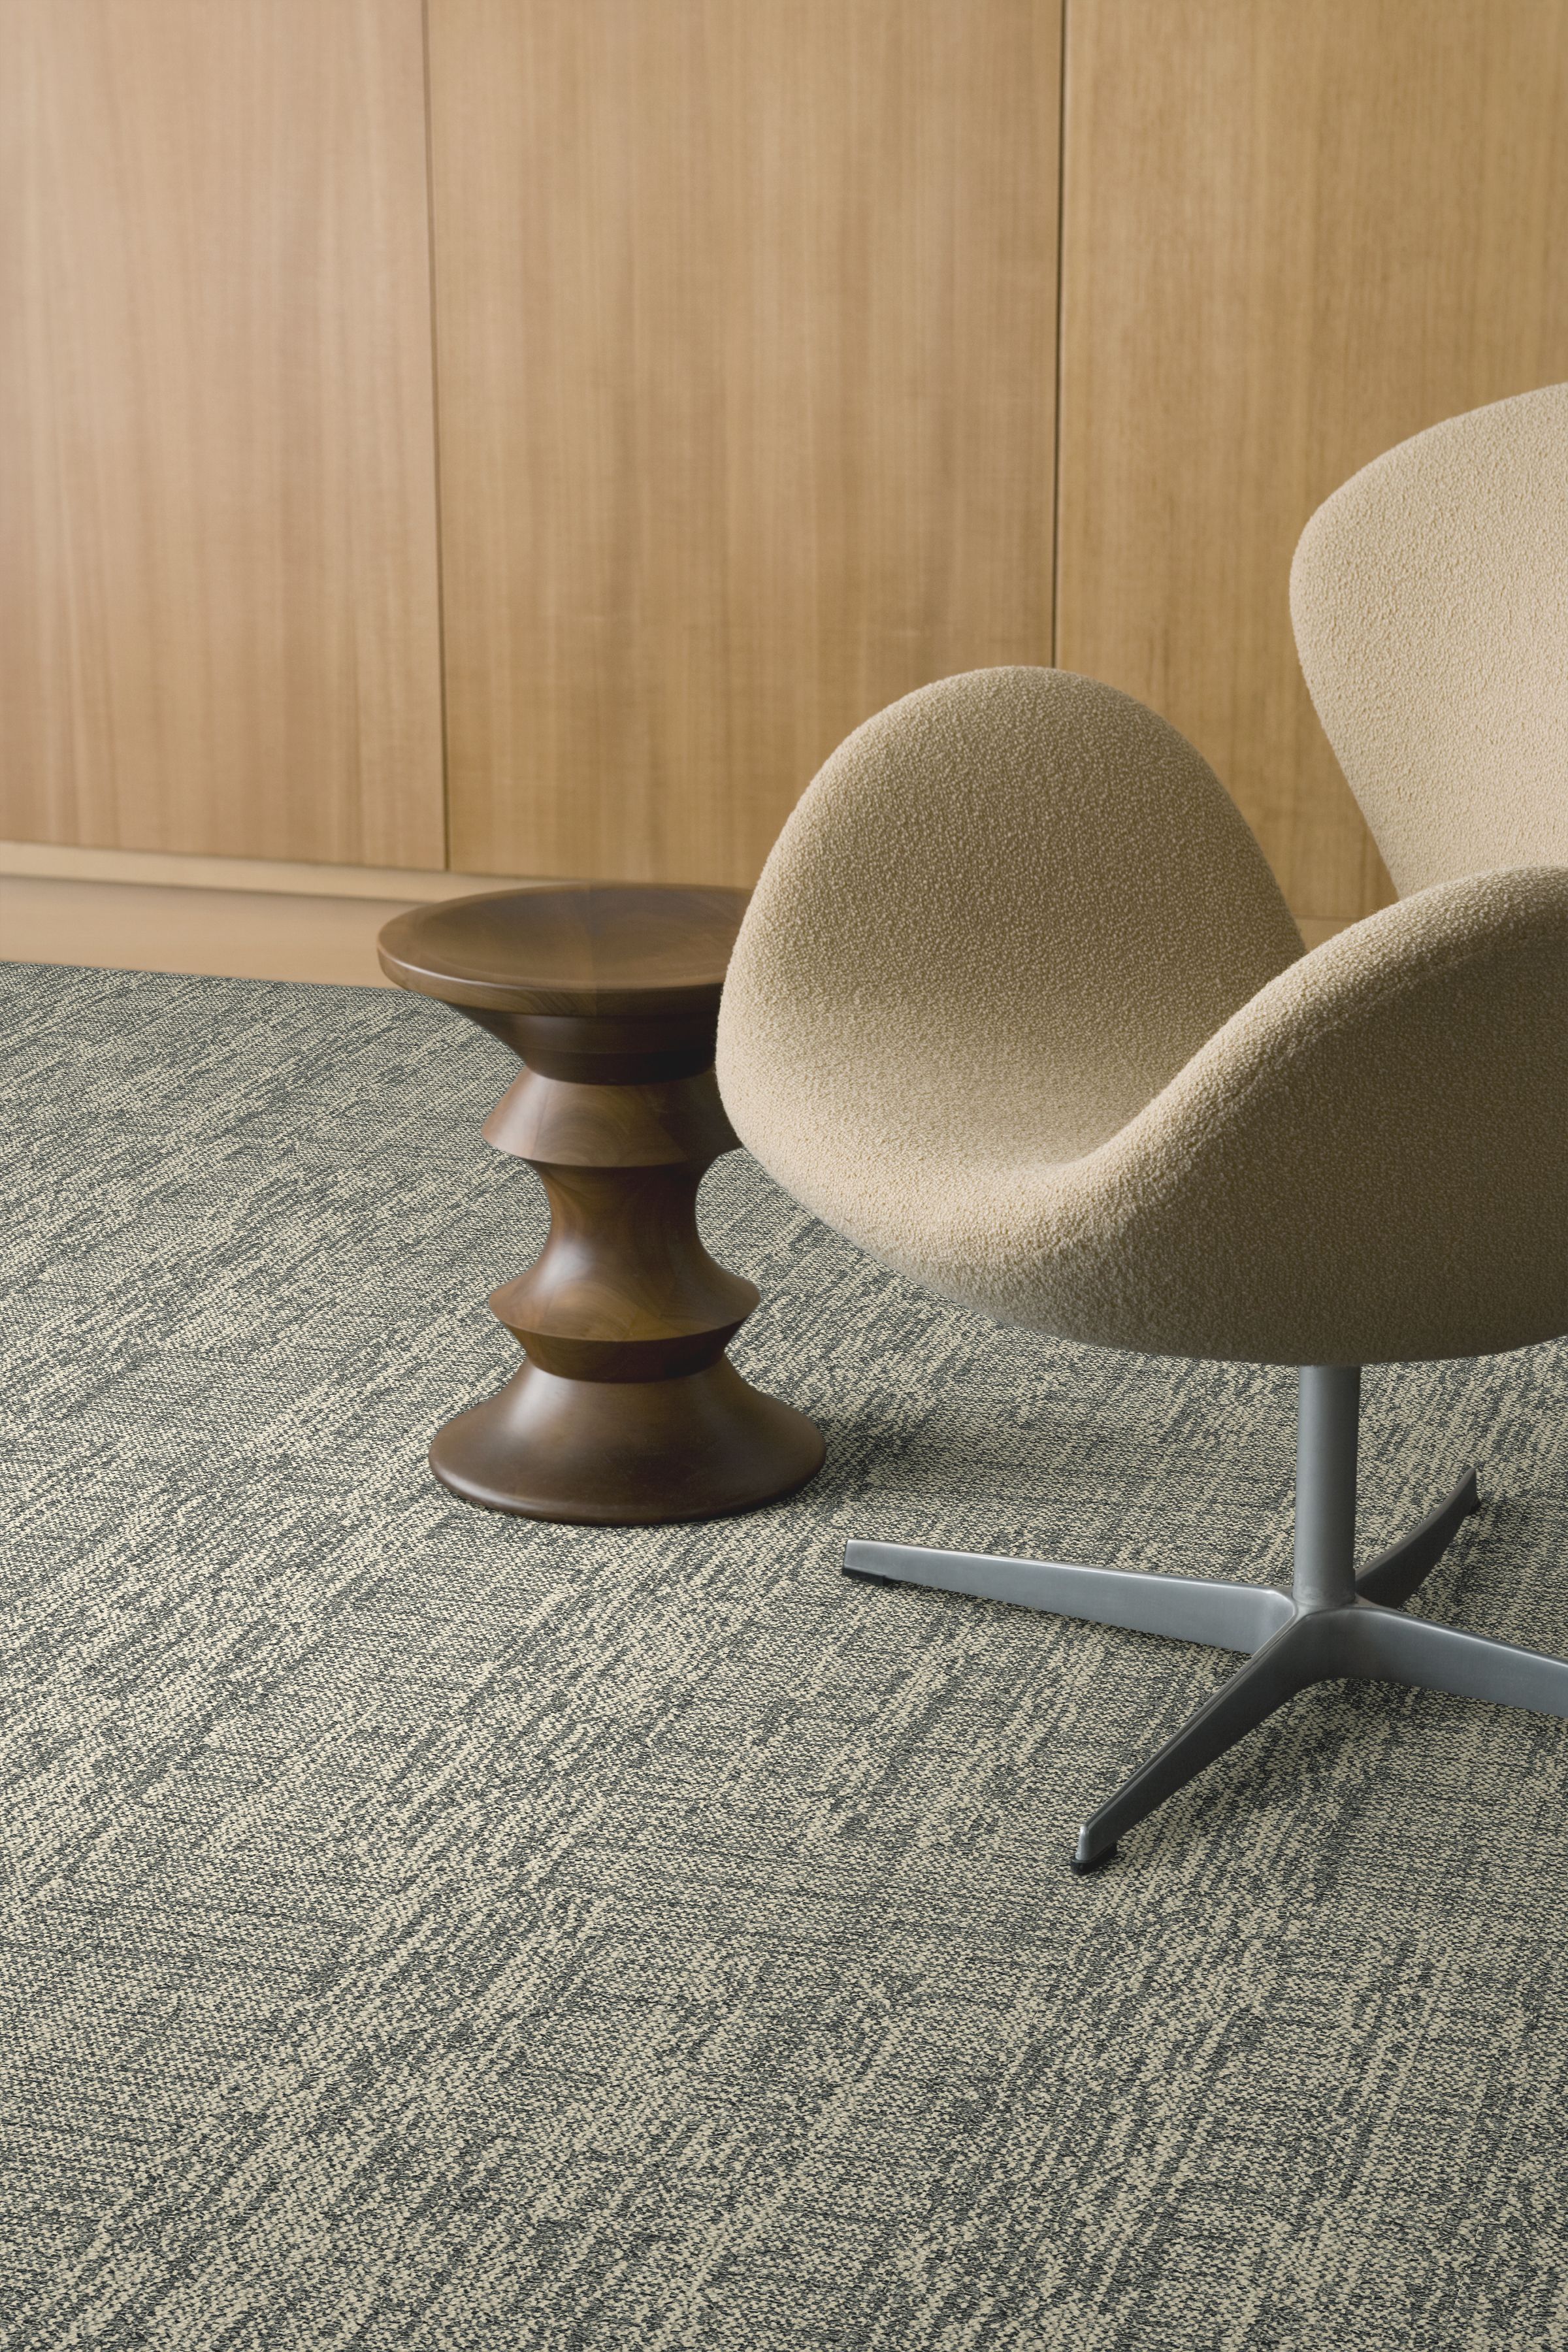 Interface Intermedio plank carpet tile in meeting room with four chairs and table imagen número 6